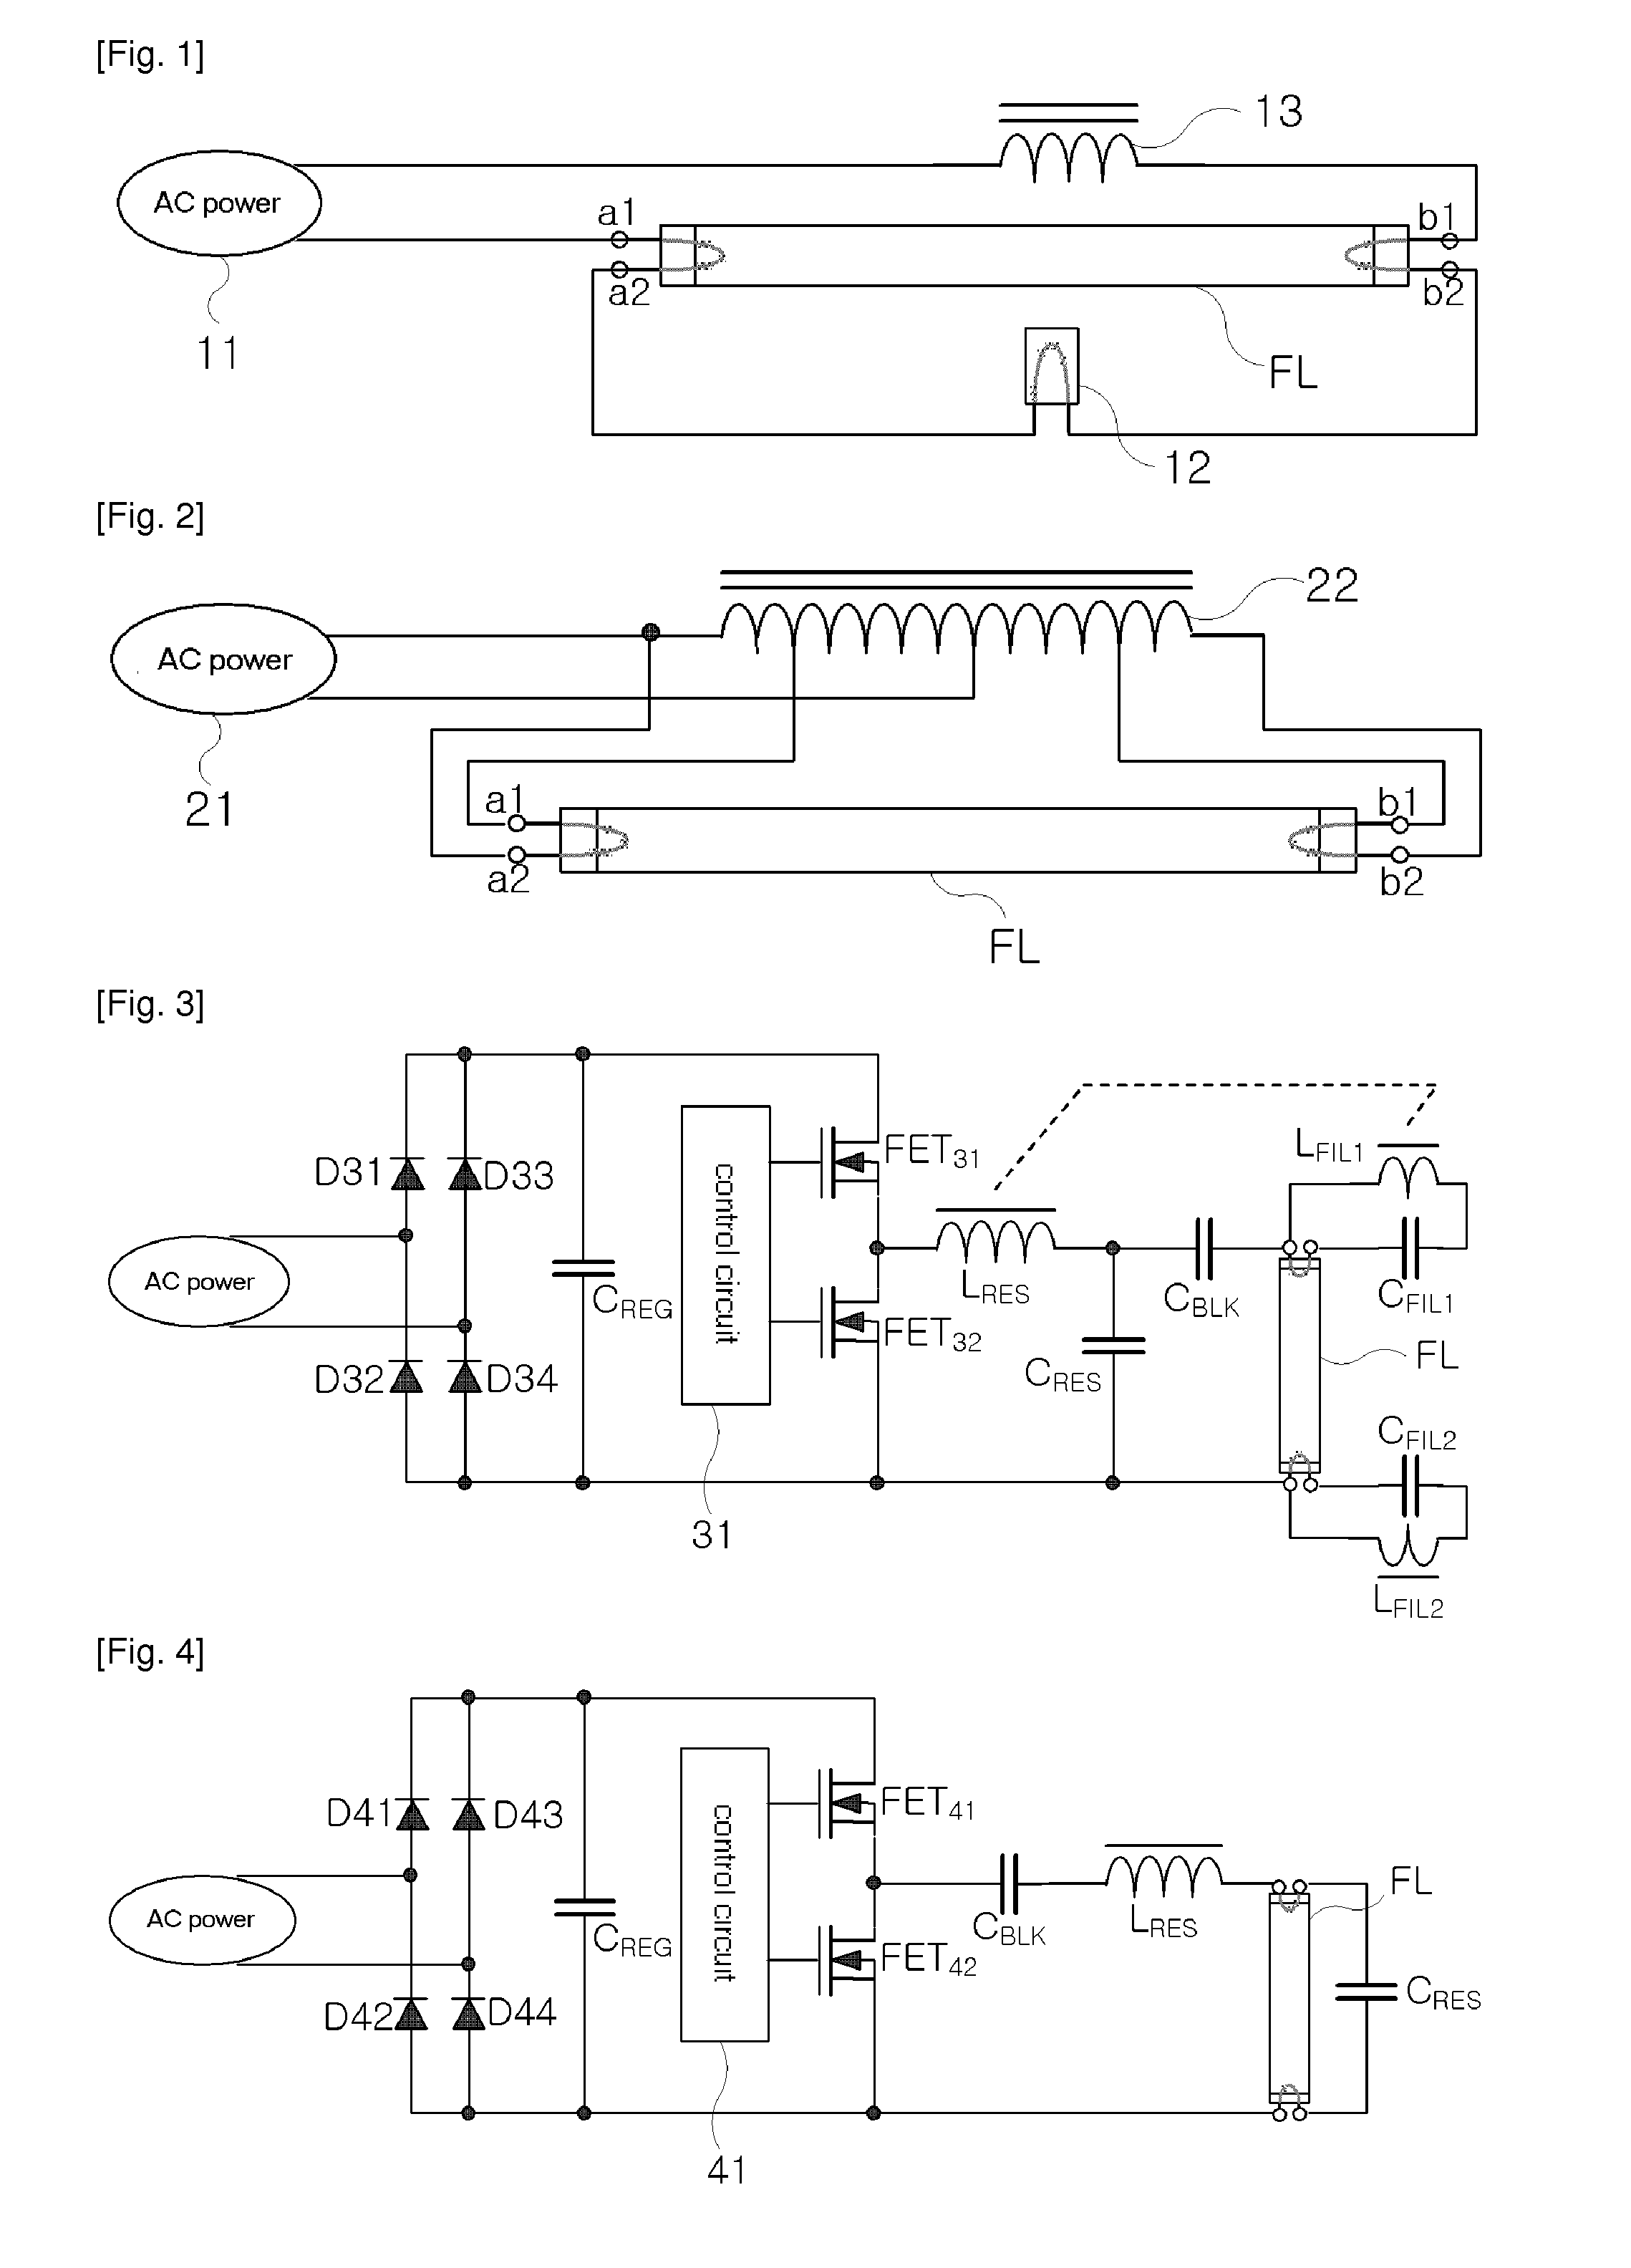 Apparatus for Connecting LED Lamps Into Lighting Instruments of a Fluorescent Lamp